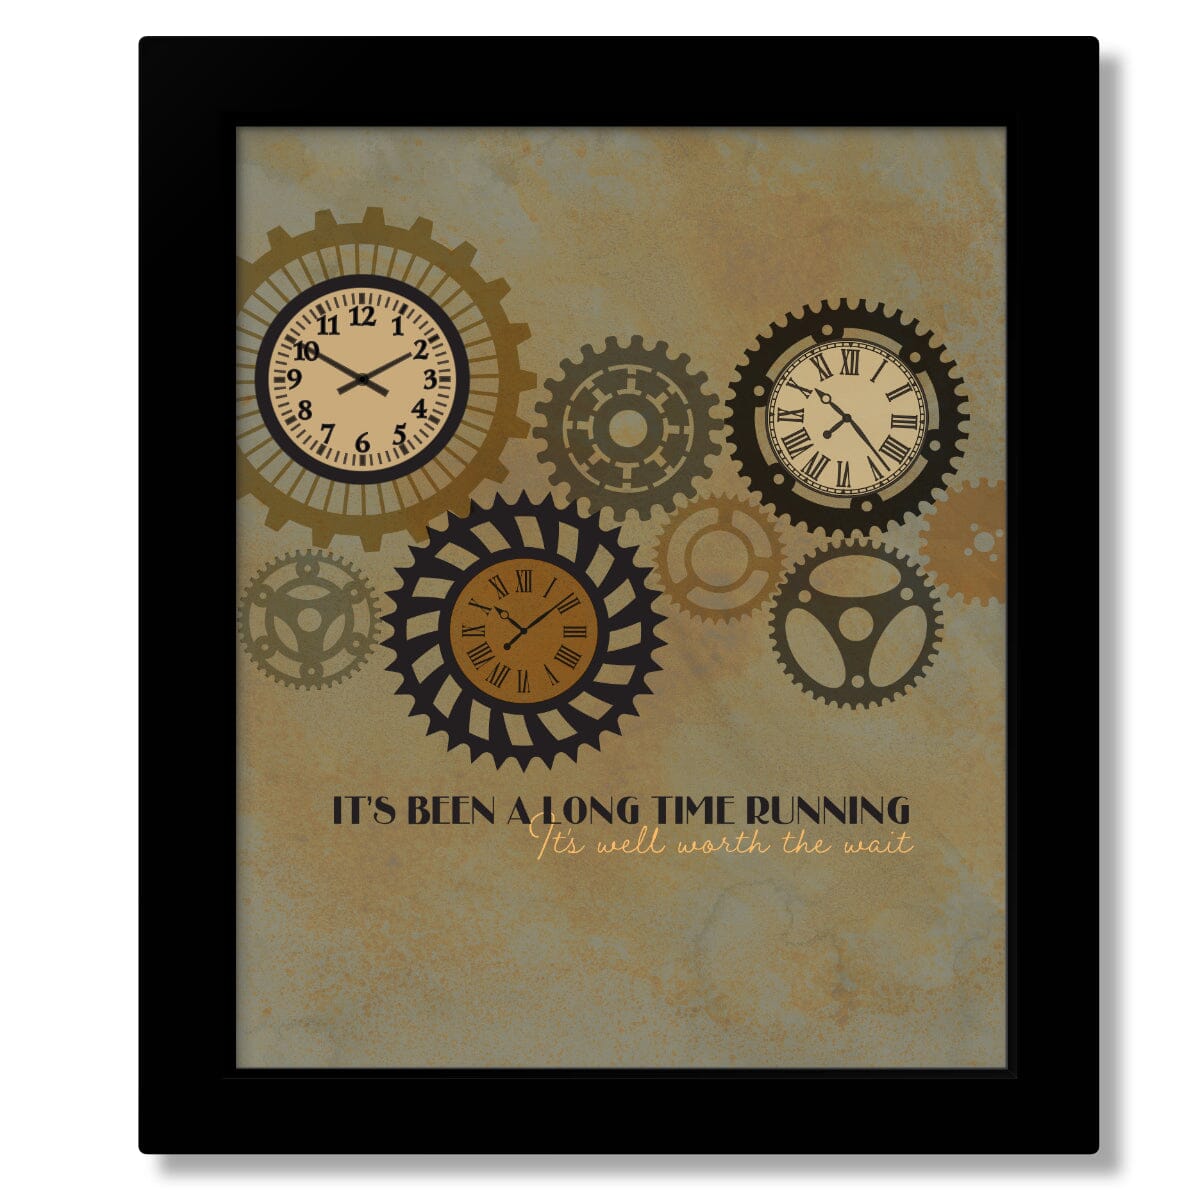 Long Time Running by the Tragically Hip - Song Lyric Print Song Lyrics Art Song Lyrics Art 8x10 Framed Print (without mat) 